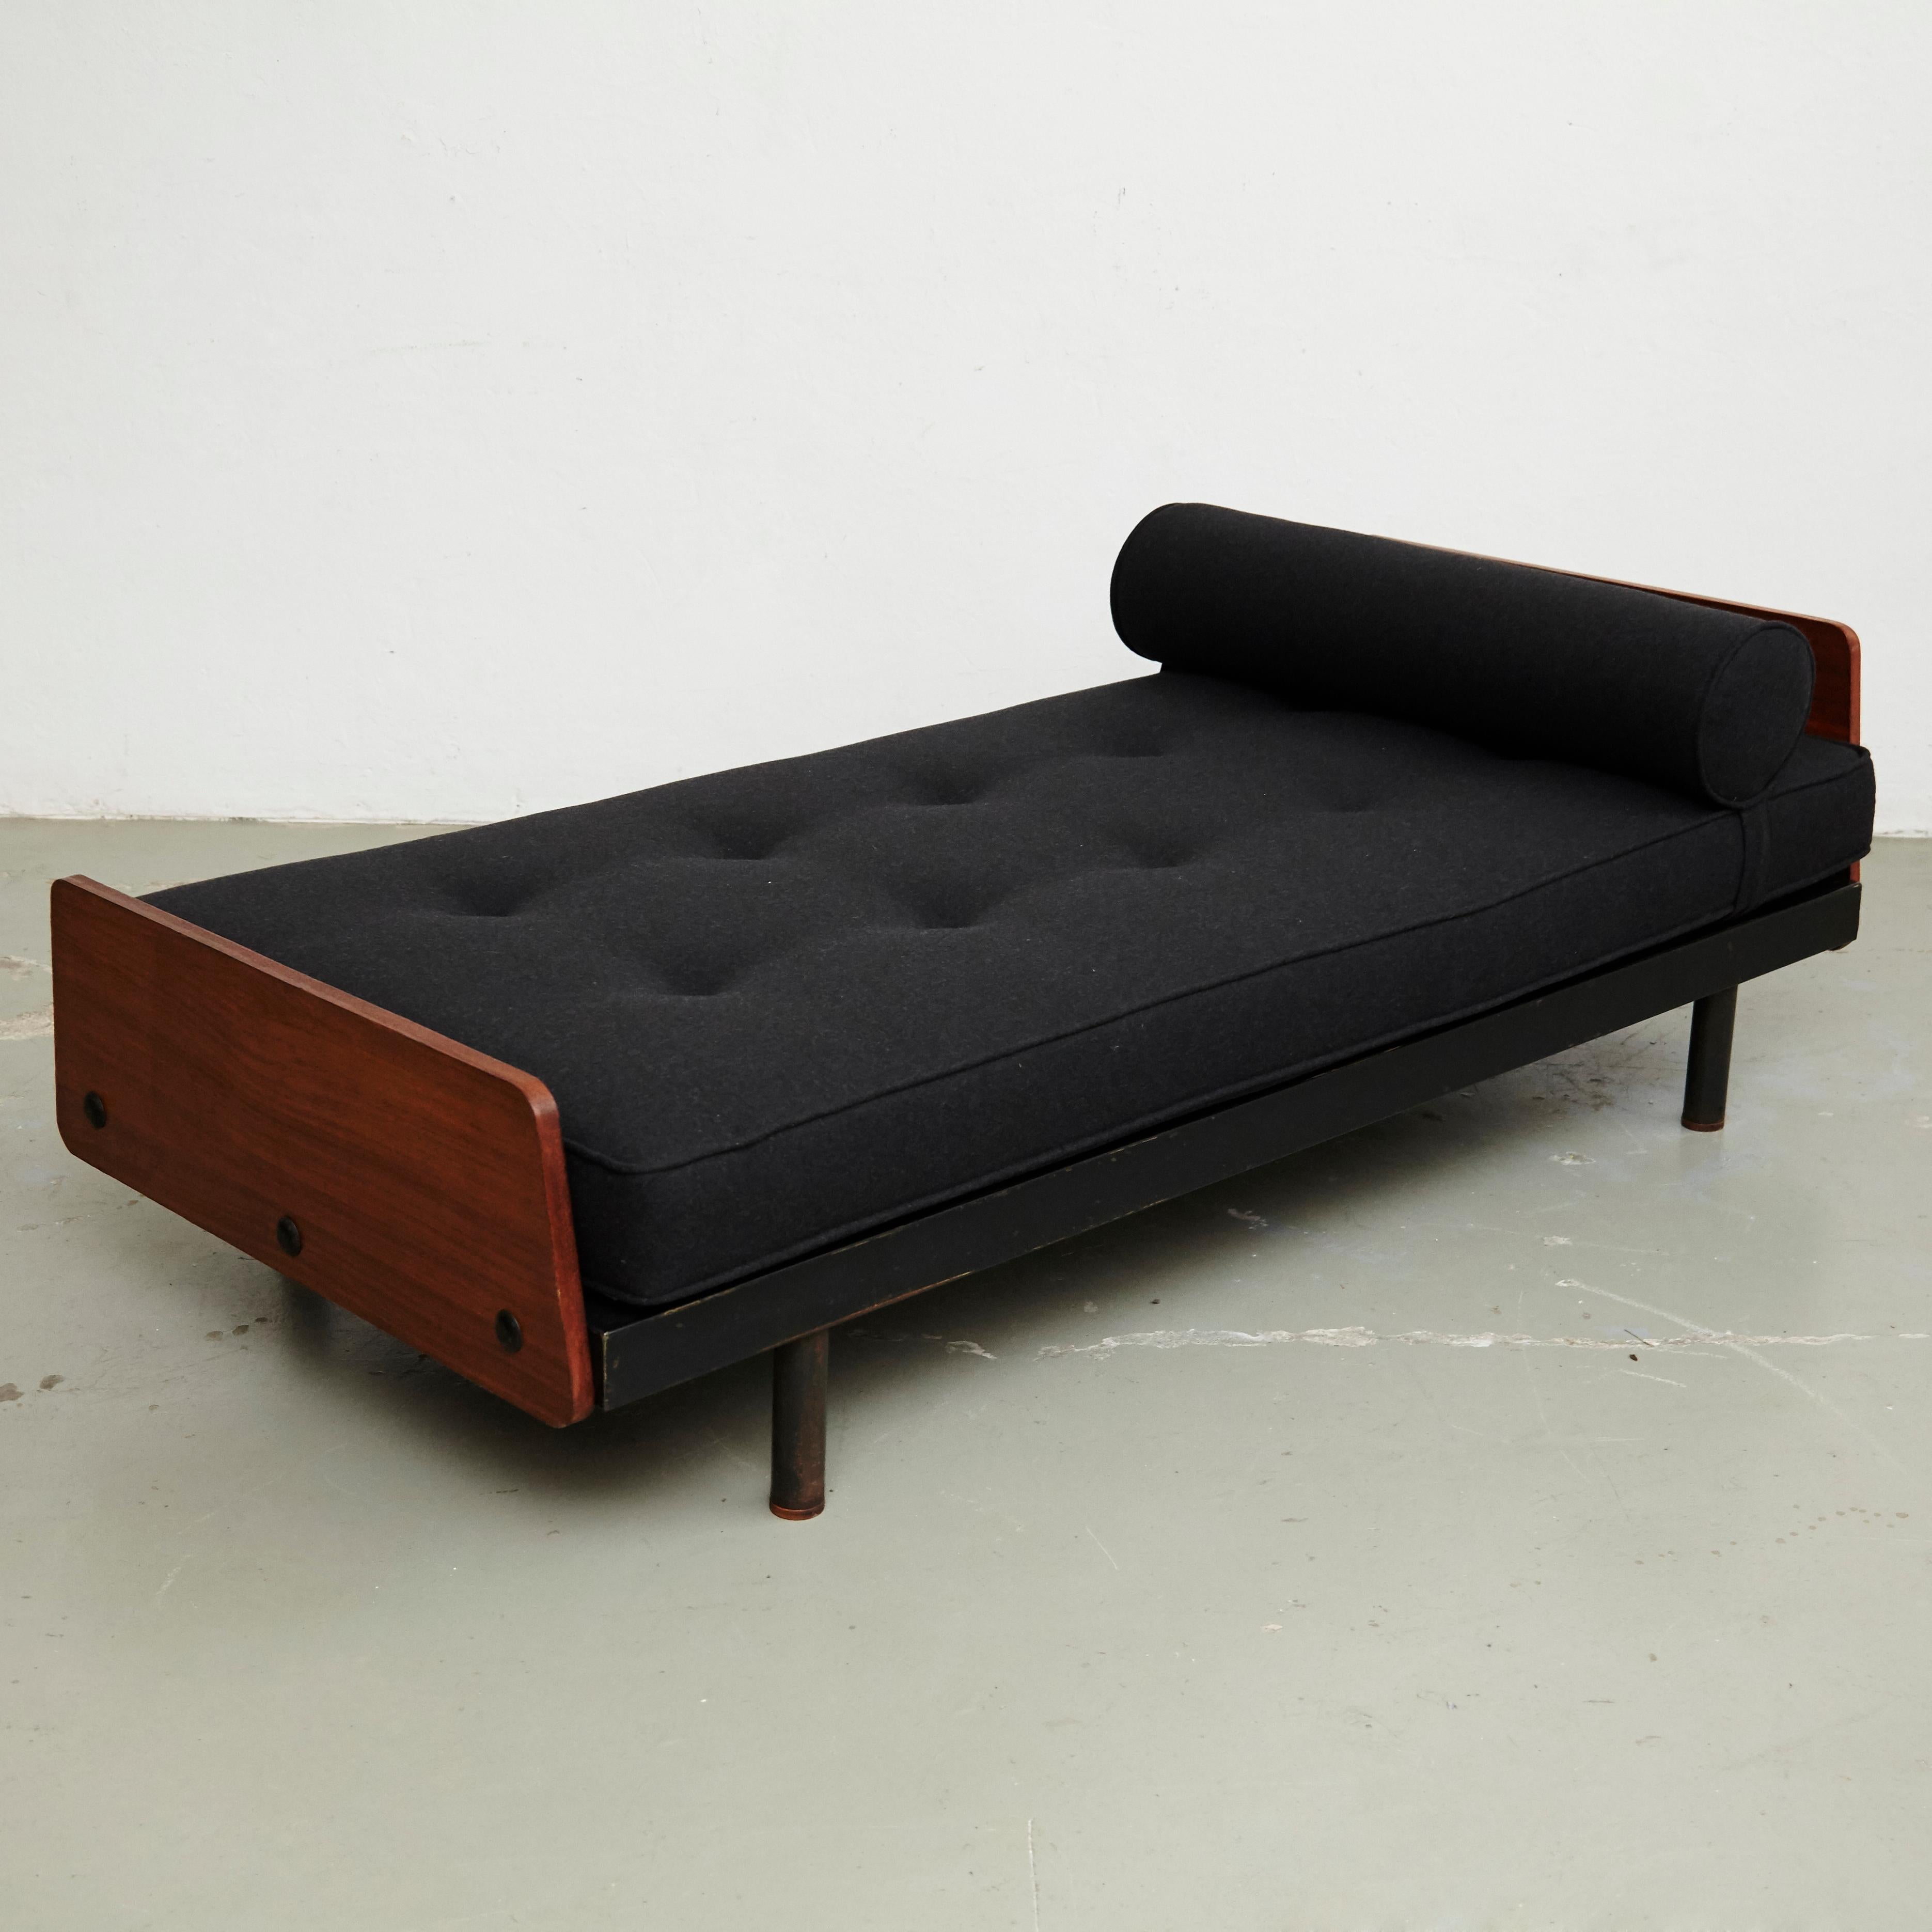 Jean Prouve Daybed in Black Metal and Wood, circa 1950 2